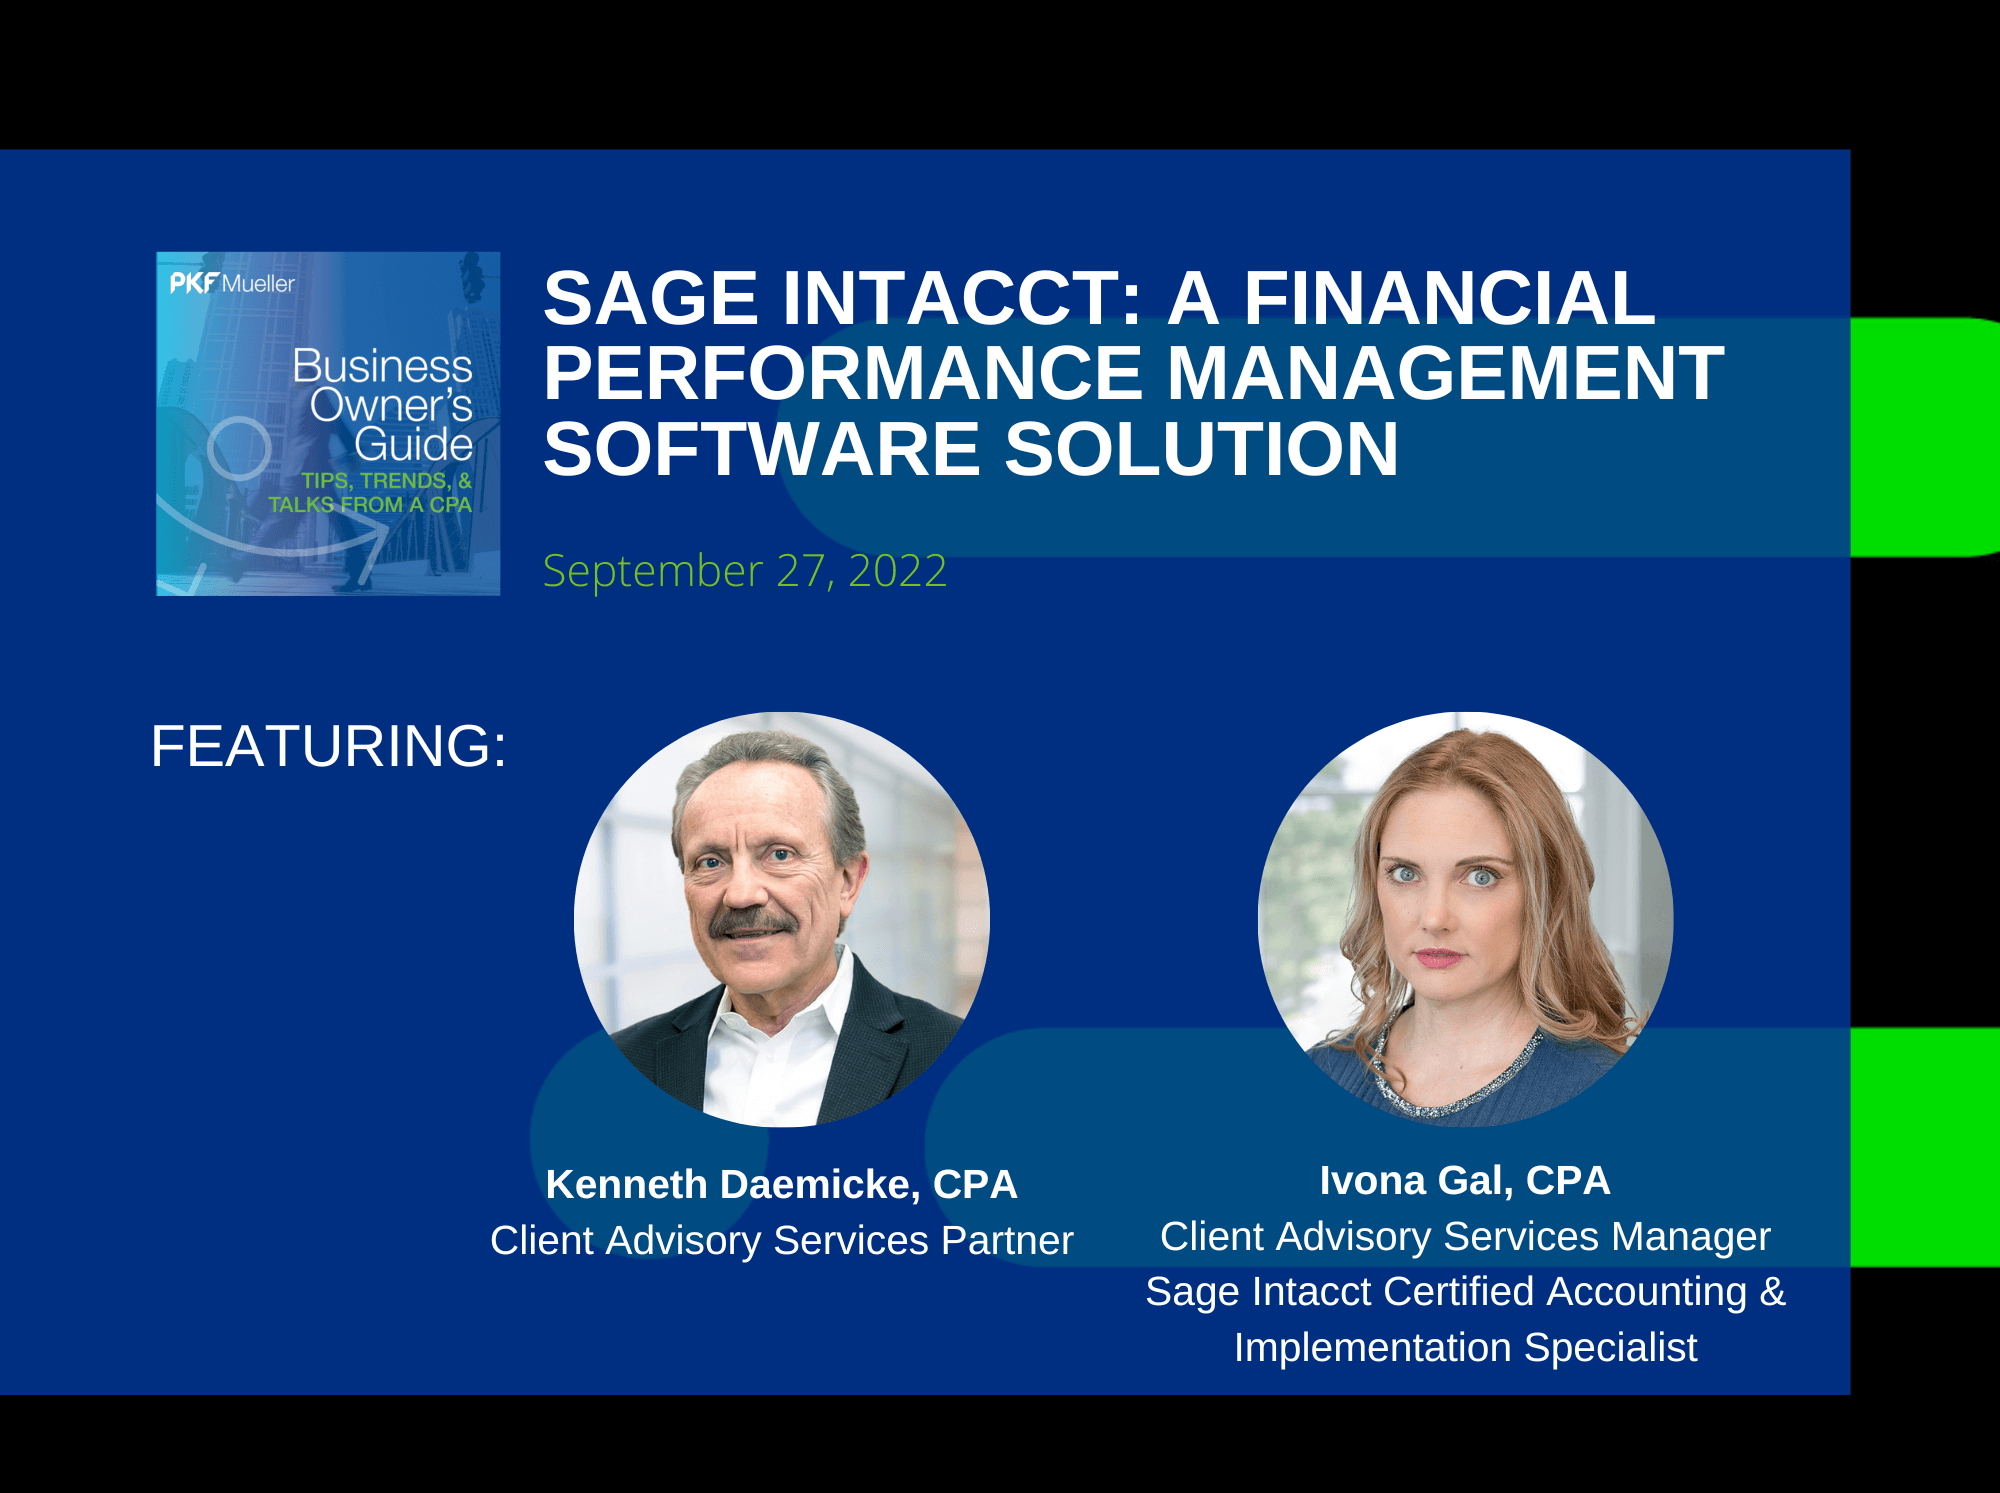 Sage Intacct: A Financial Performance Management Software Solution